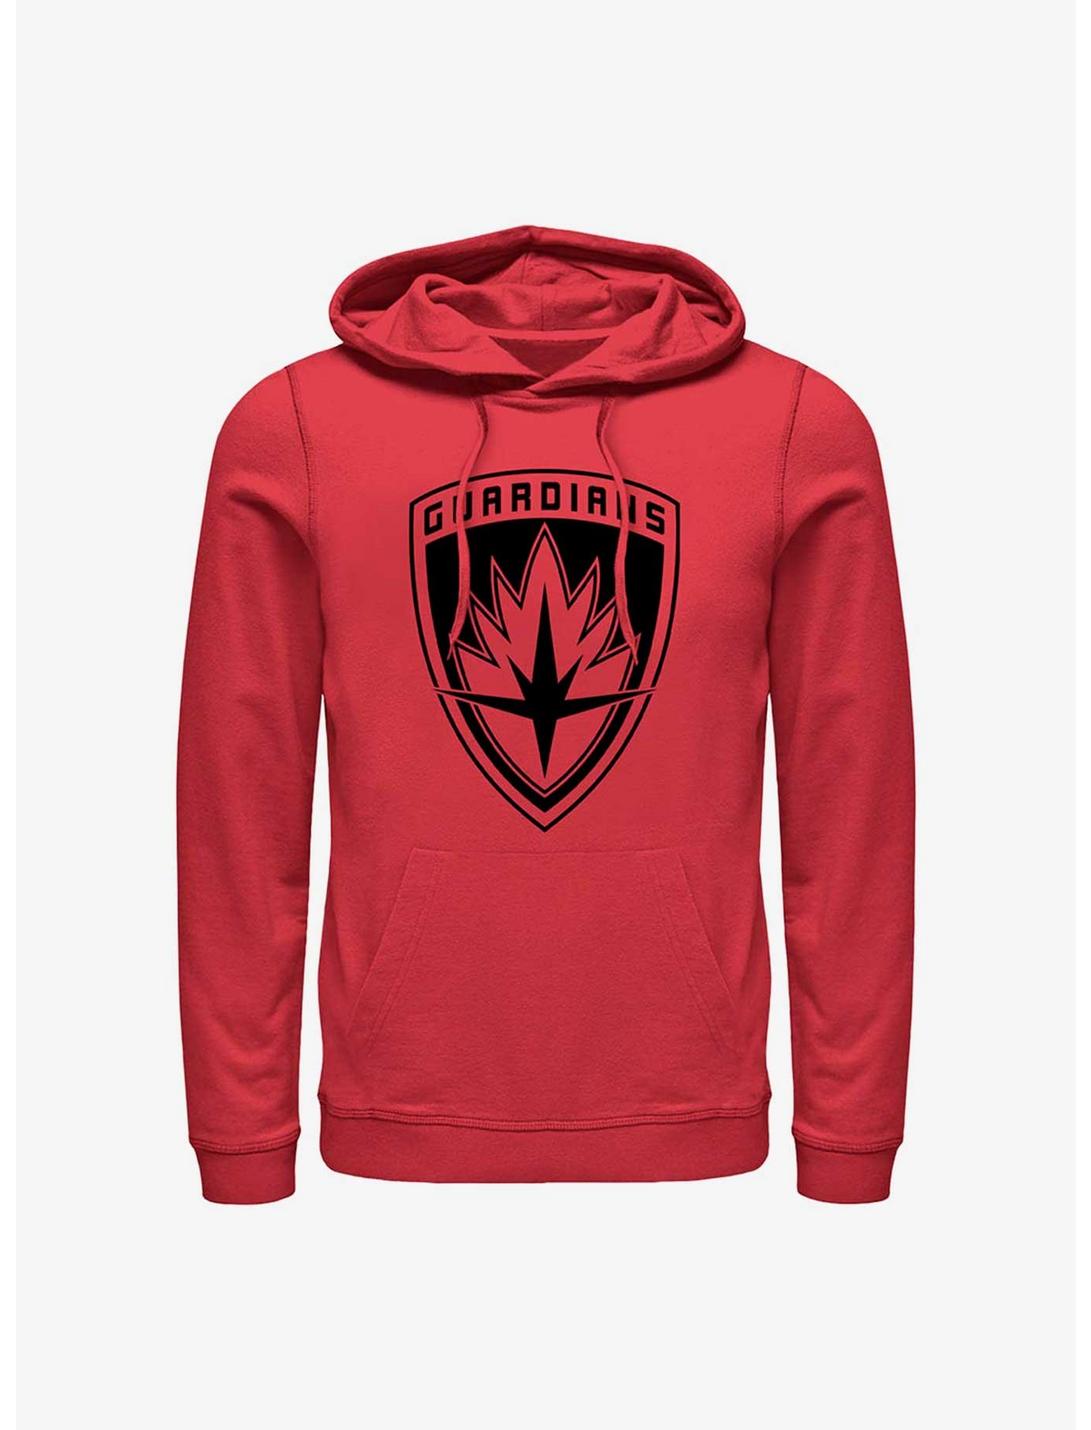 Marvel Guardians of the Galaxy Guardians Emblem Hoodie, RED, hi-res